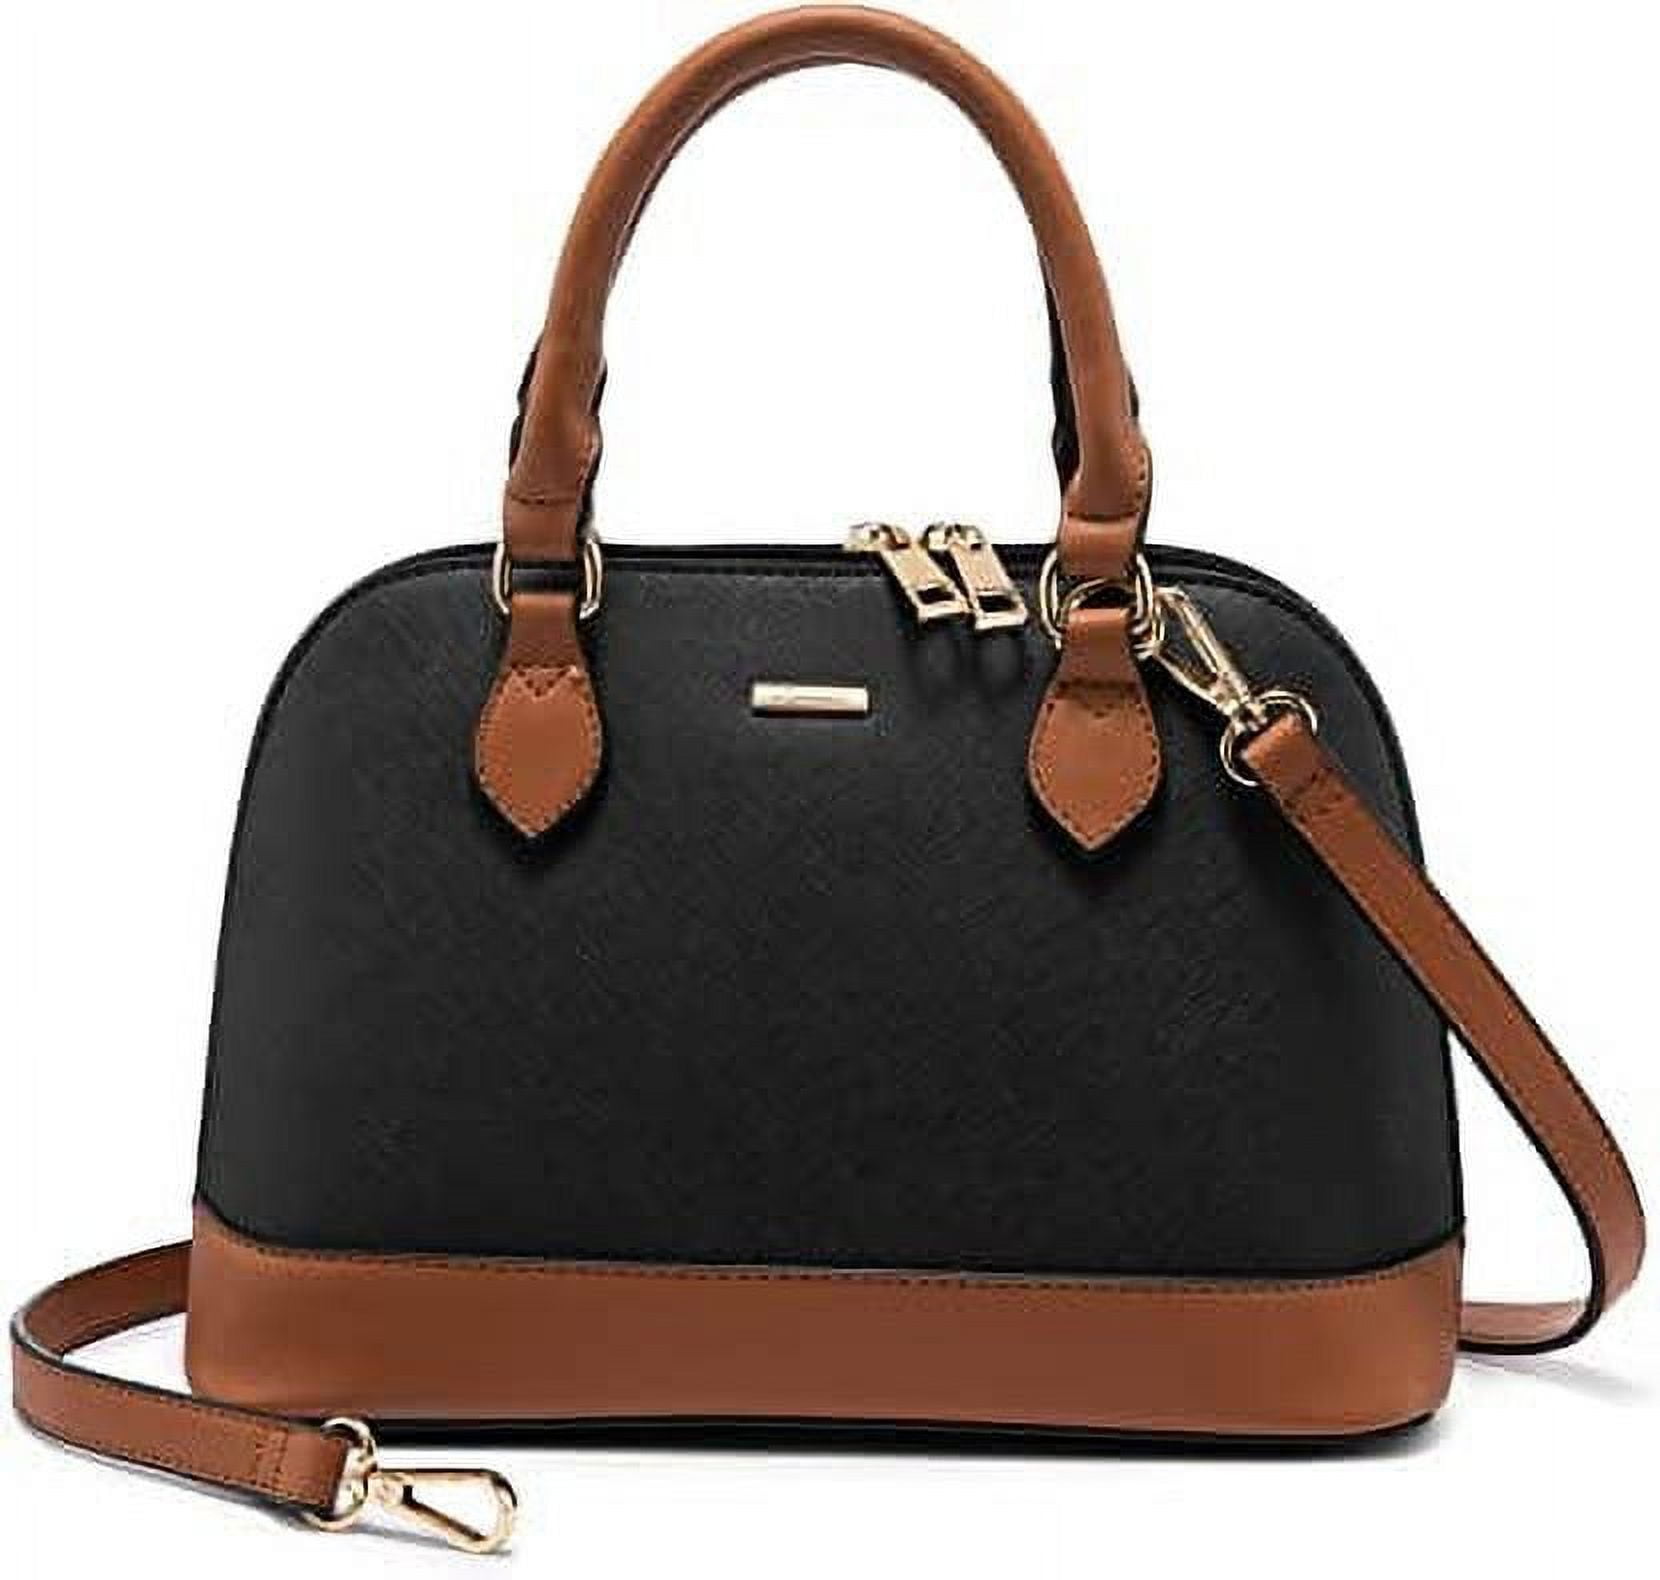 Lovevook Dome Satchel Handbags for Women Small Crossbody Bags Shoulder Purse with Classic Double Zip Black Brown 0d8dc8fd f435 44e4 8faa 45a8da9ac985.95624e7c05434335e983f3c3ceaddabc